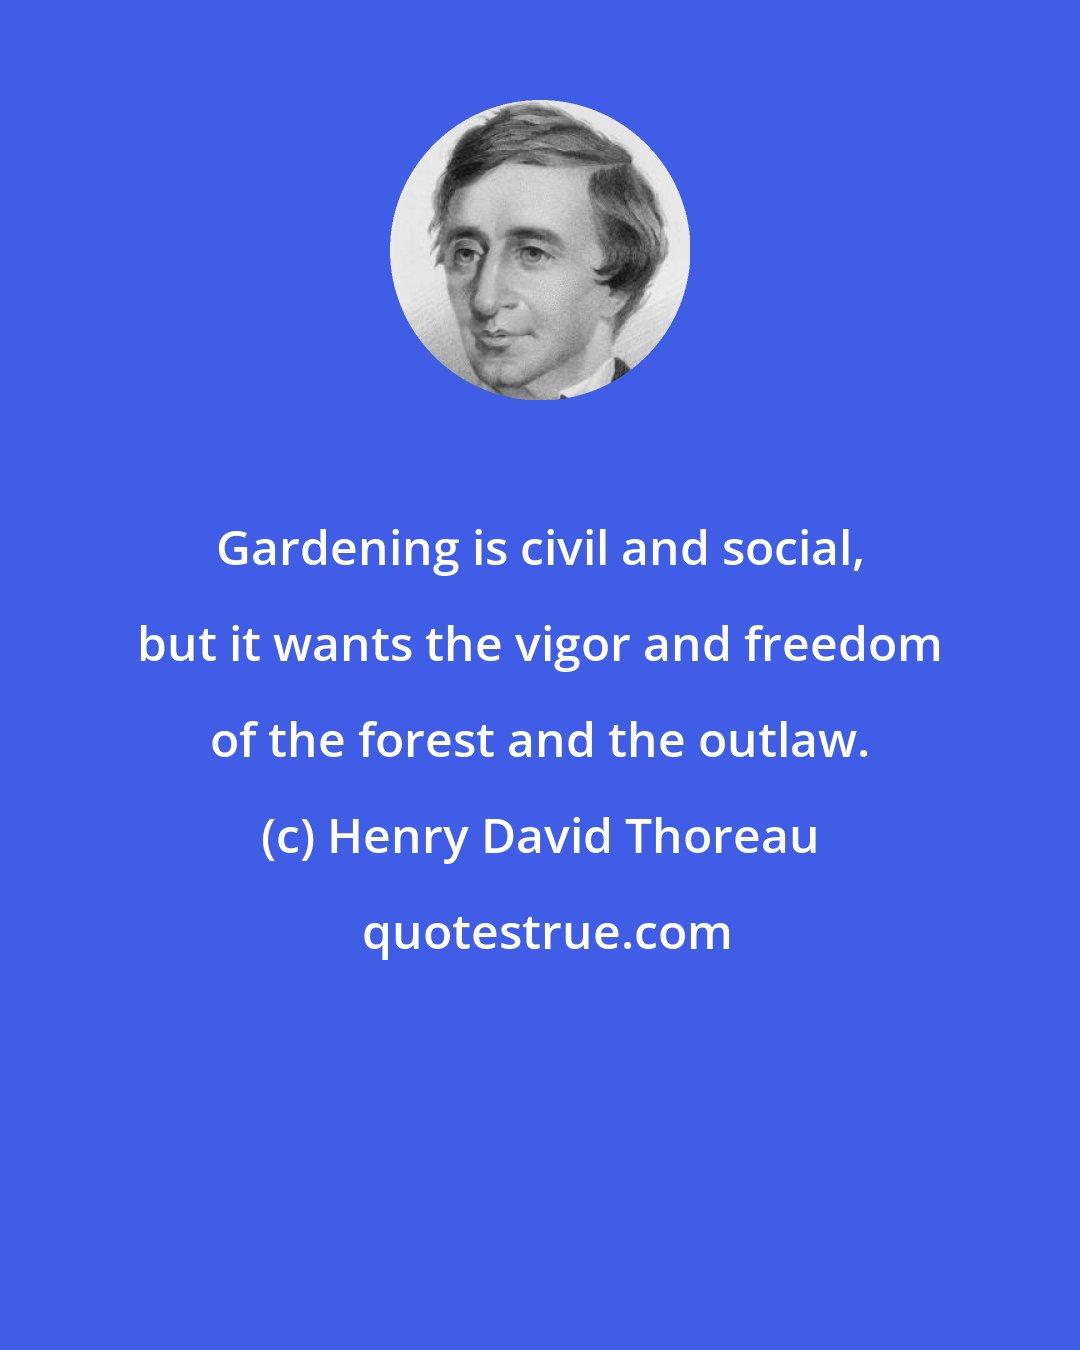 Henry David Thoreau: Gardening is civil and social, but it wants the vigor and freedom of the forest and the outlaw.